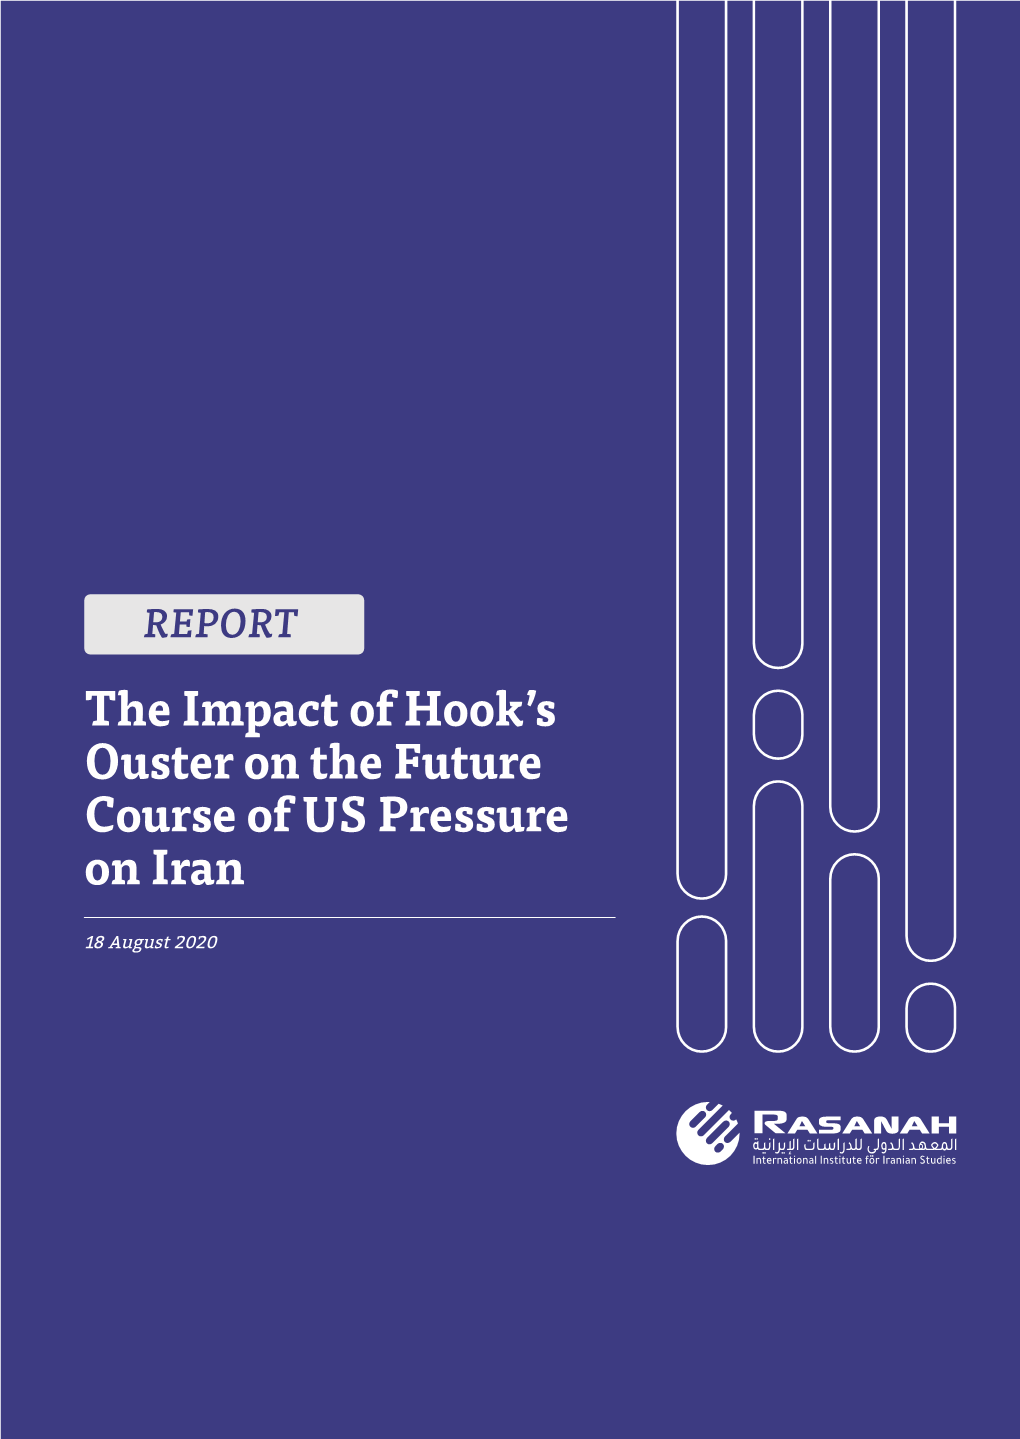 The Impact of Hook's Ouster on the Future Course of US Pressure